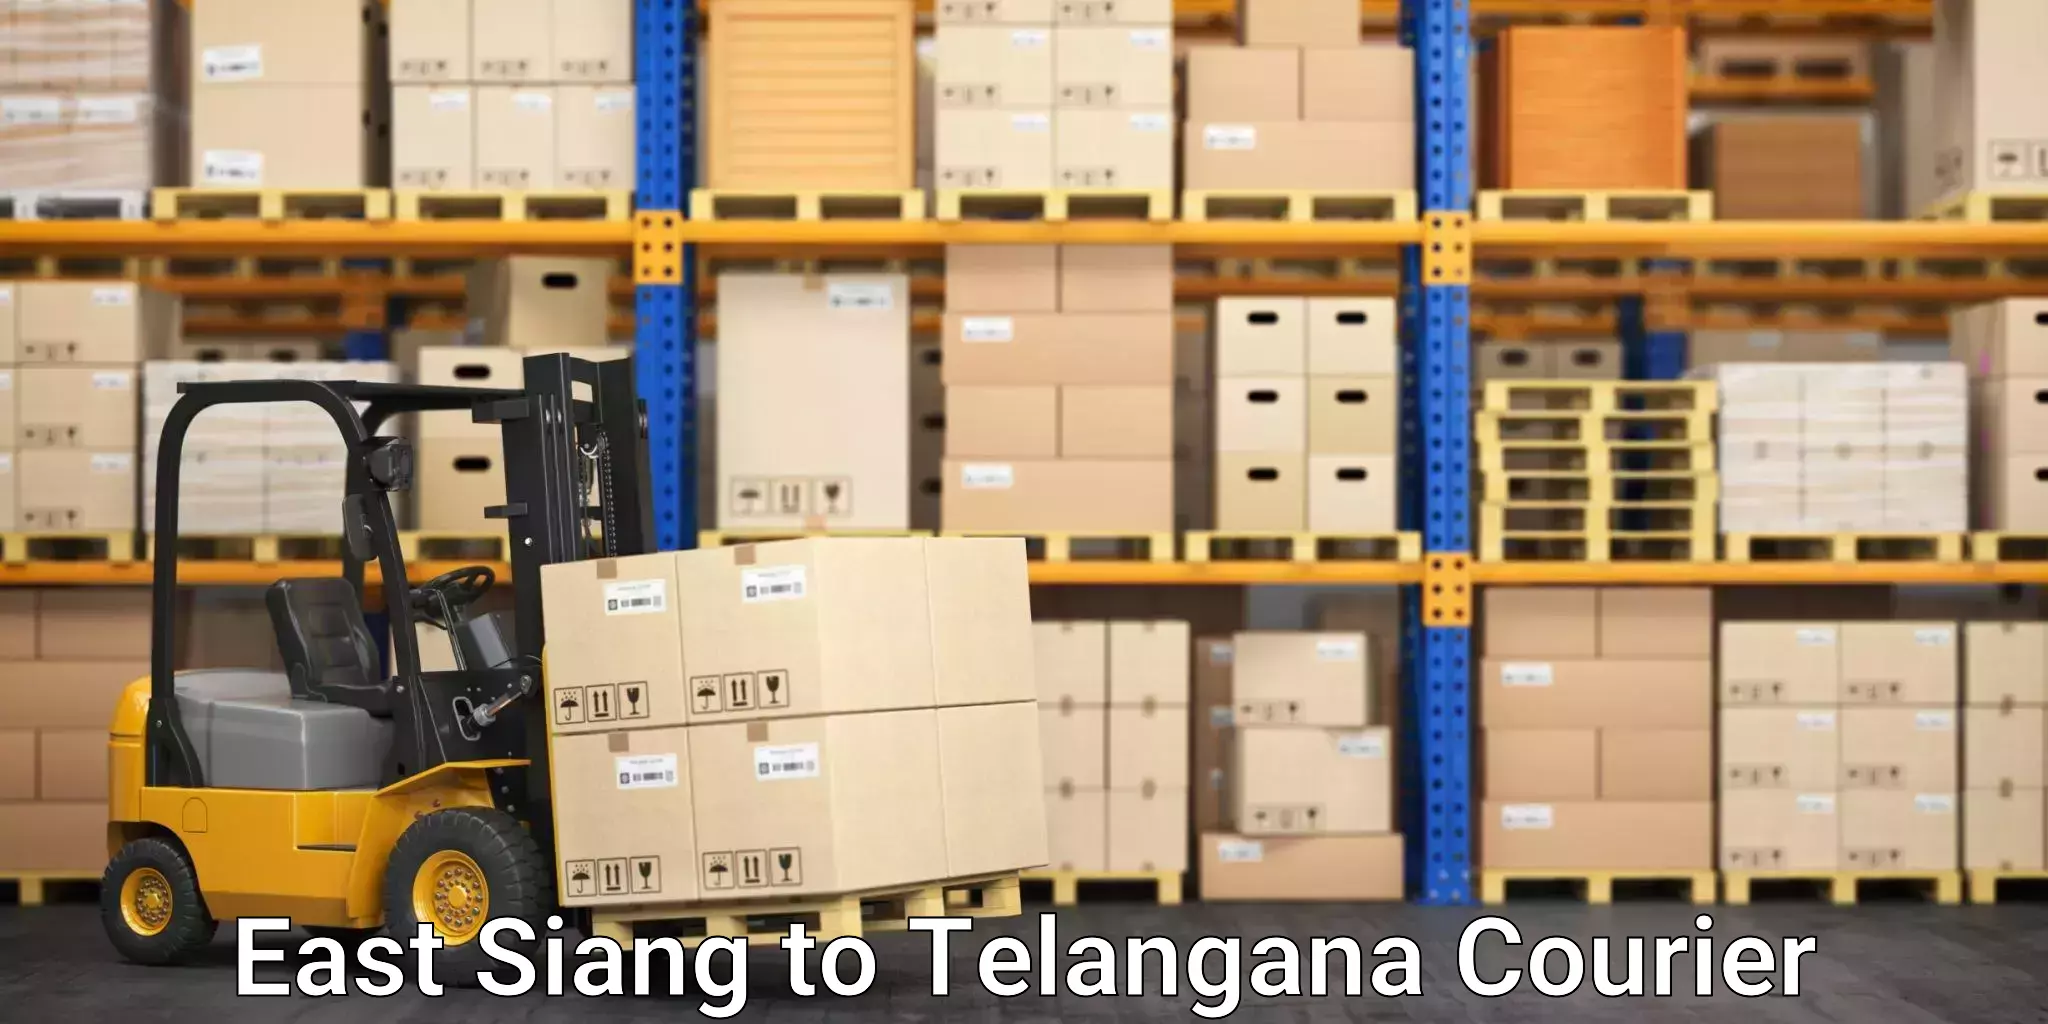 Reliable shipping solutions East Siang to Telangana